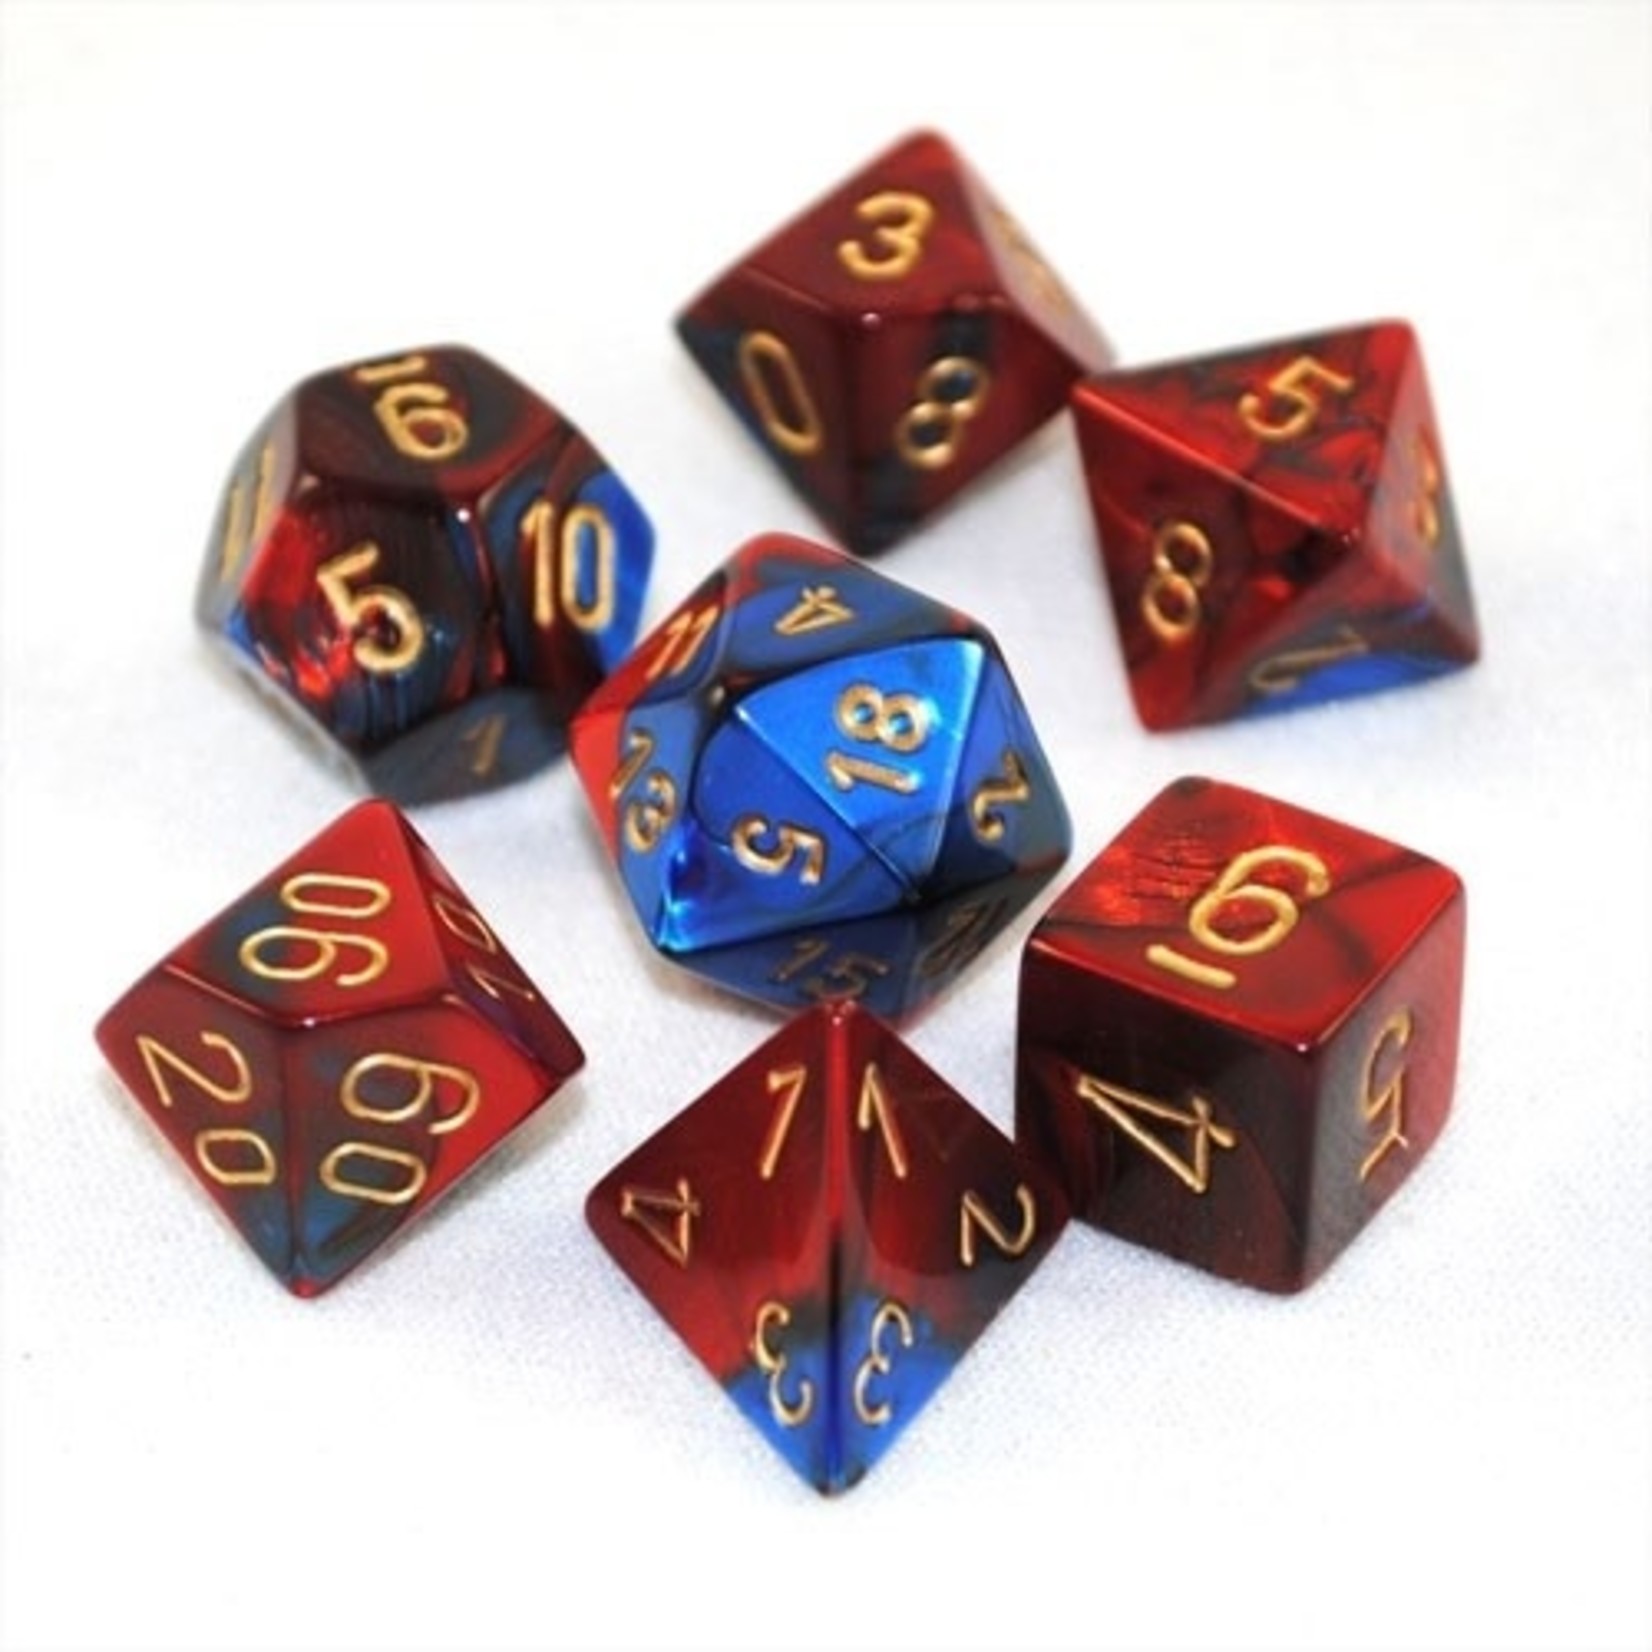 Chessex 7-Piece Dice Set: Gemini #2 Blue & Red with Gold Numbers